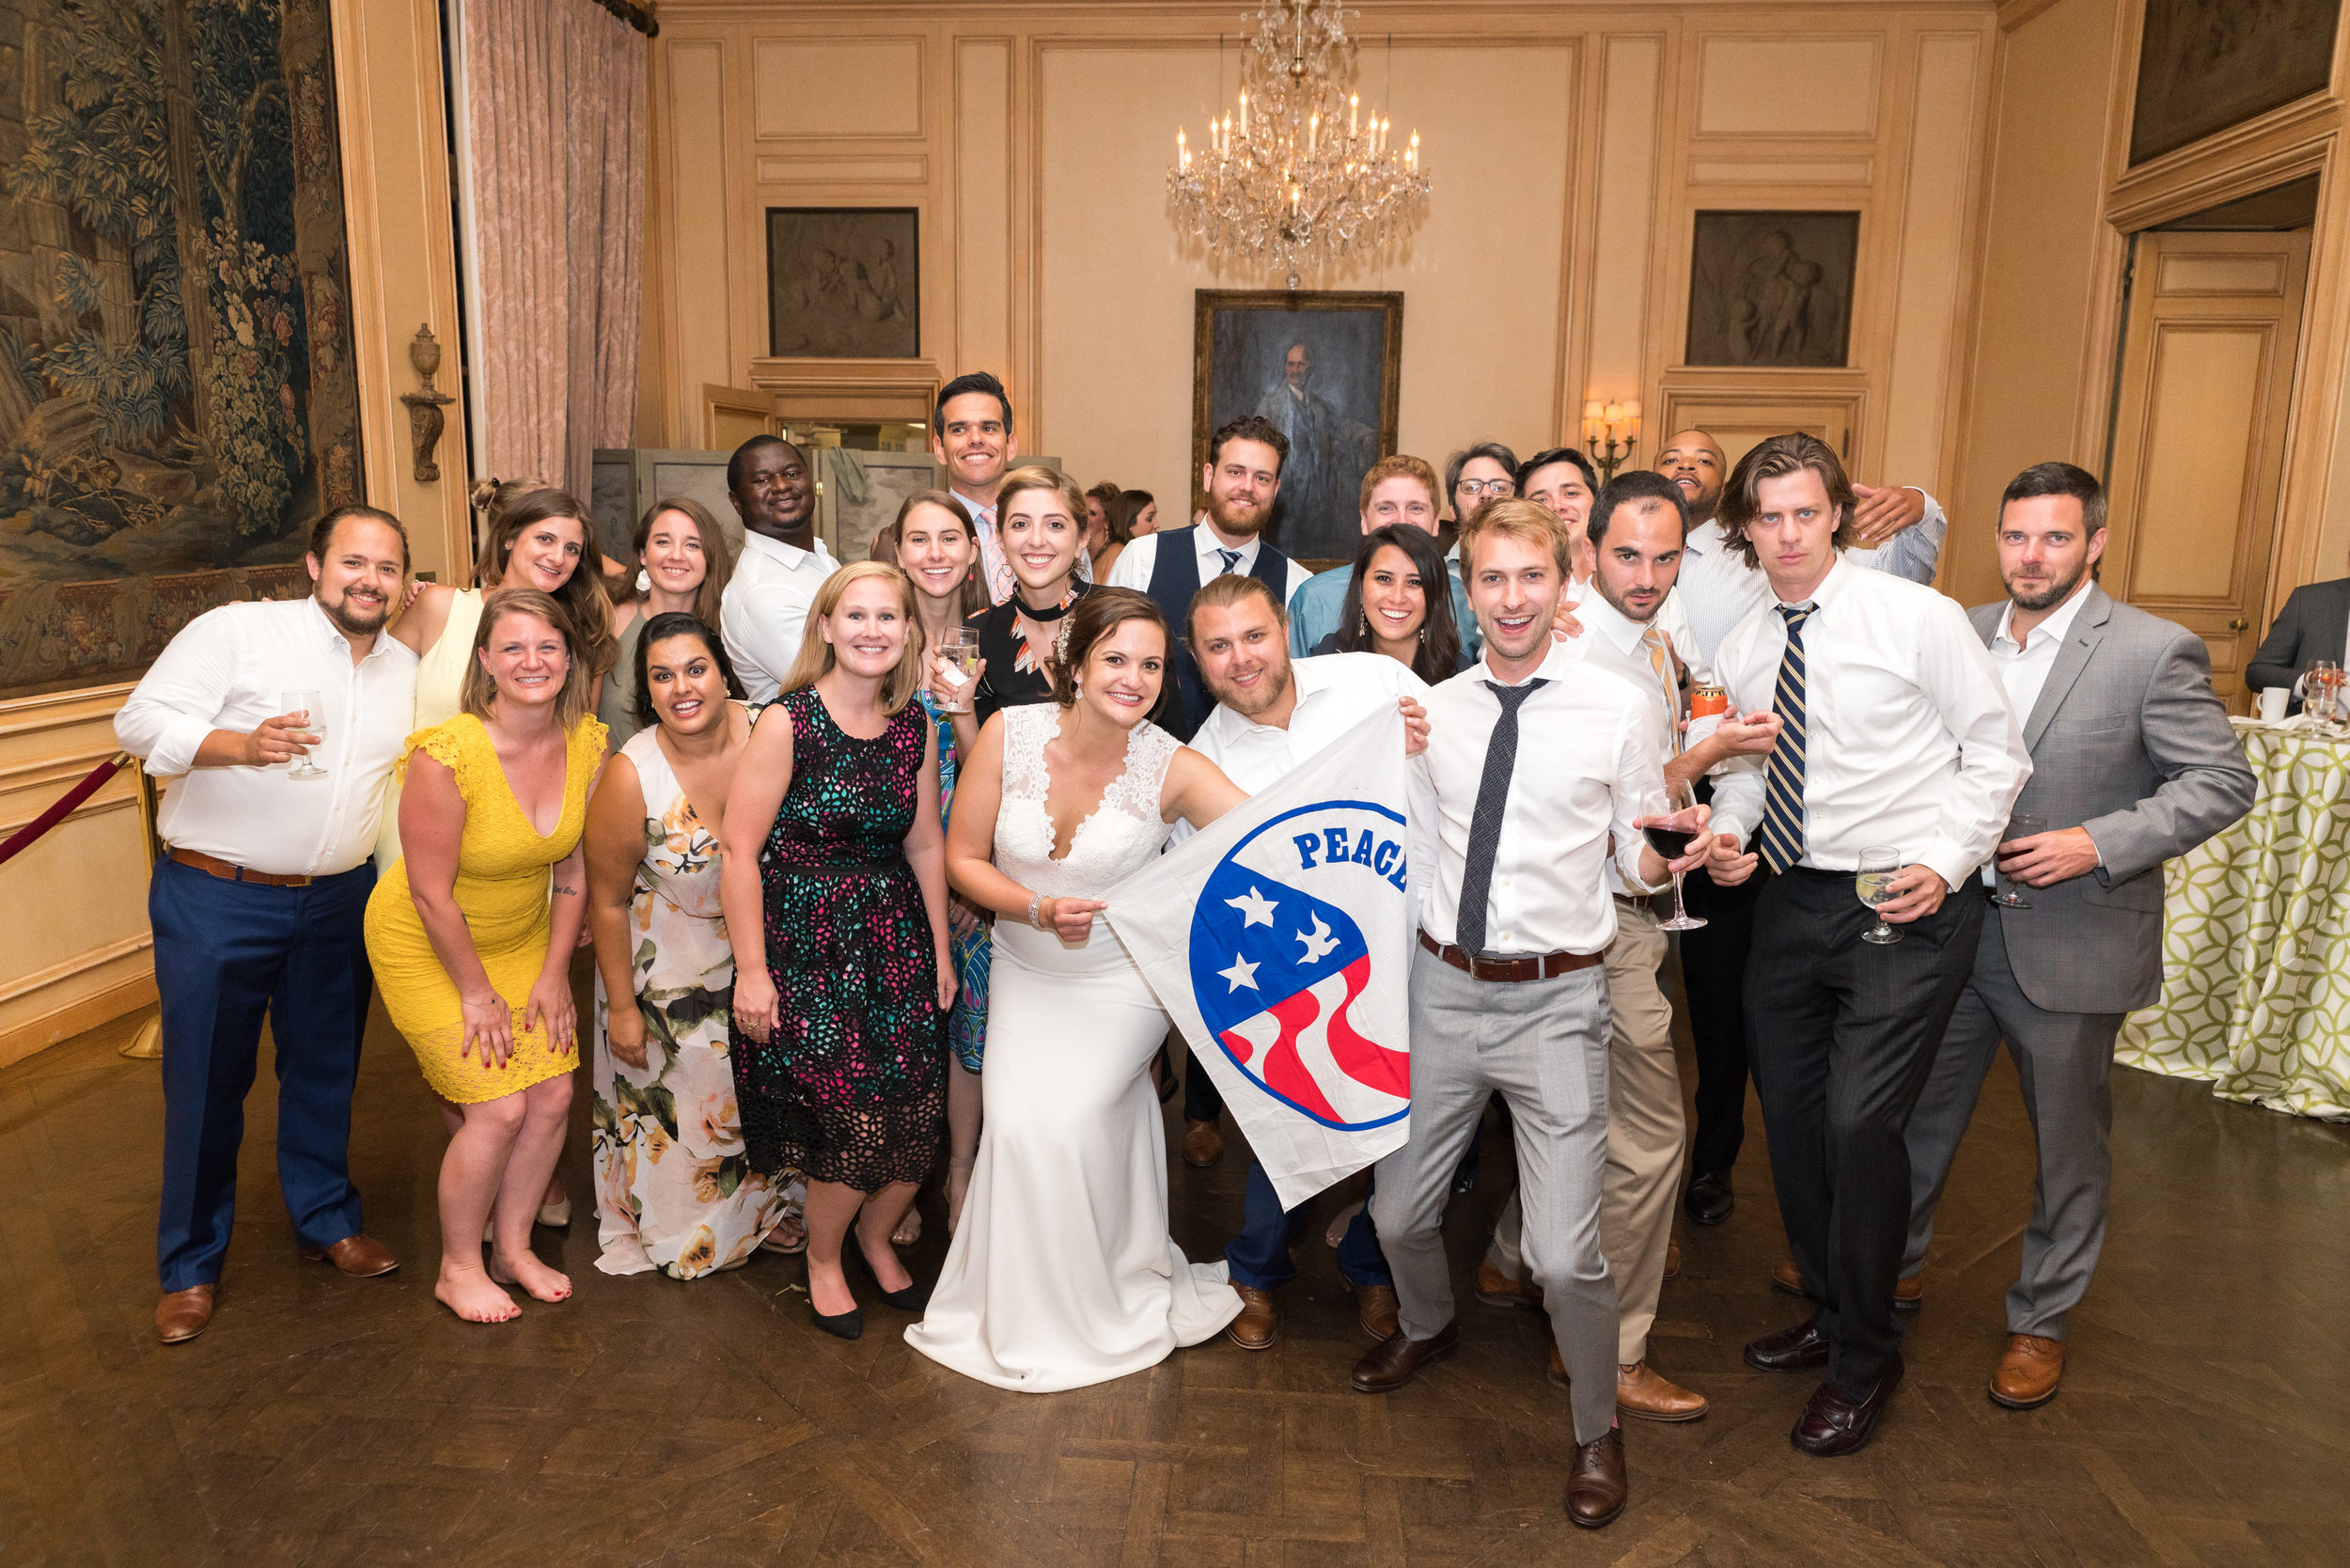 Peace Corps group wedding photo at Meridian House